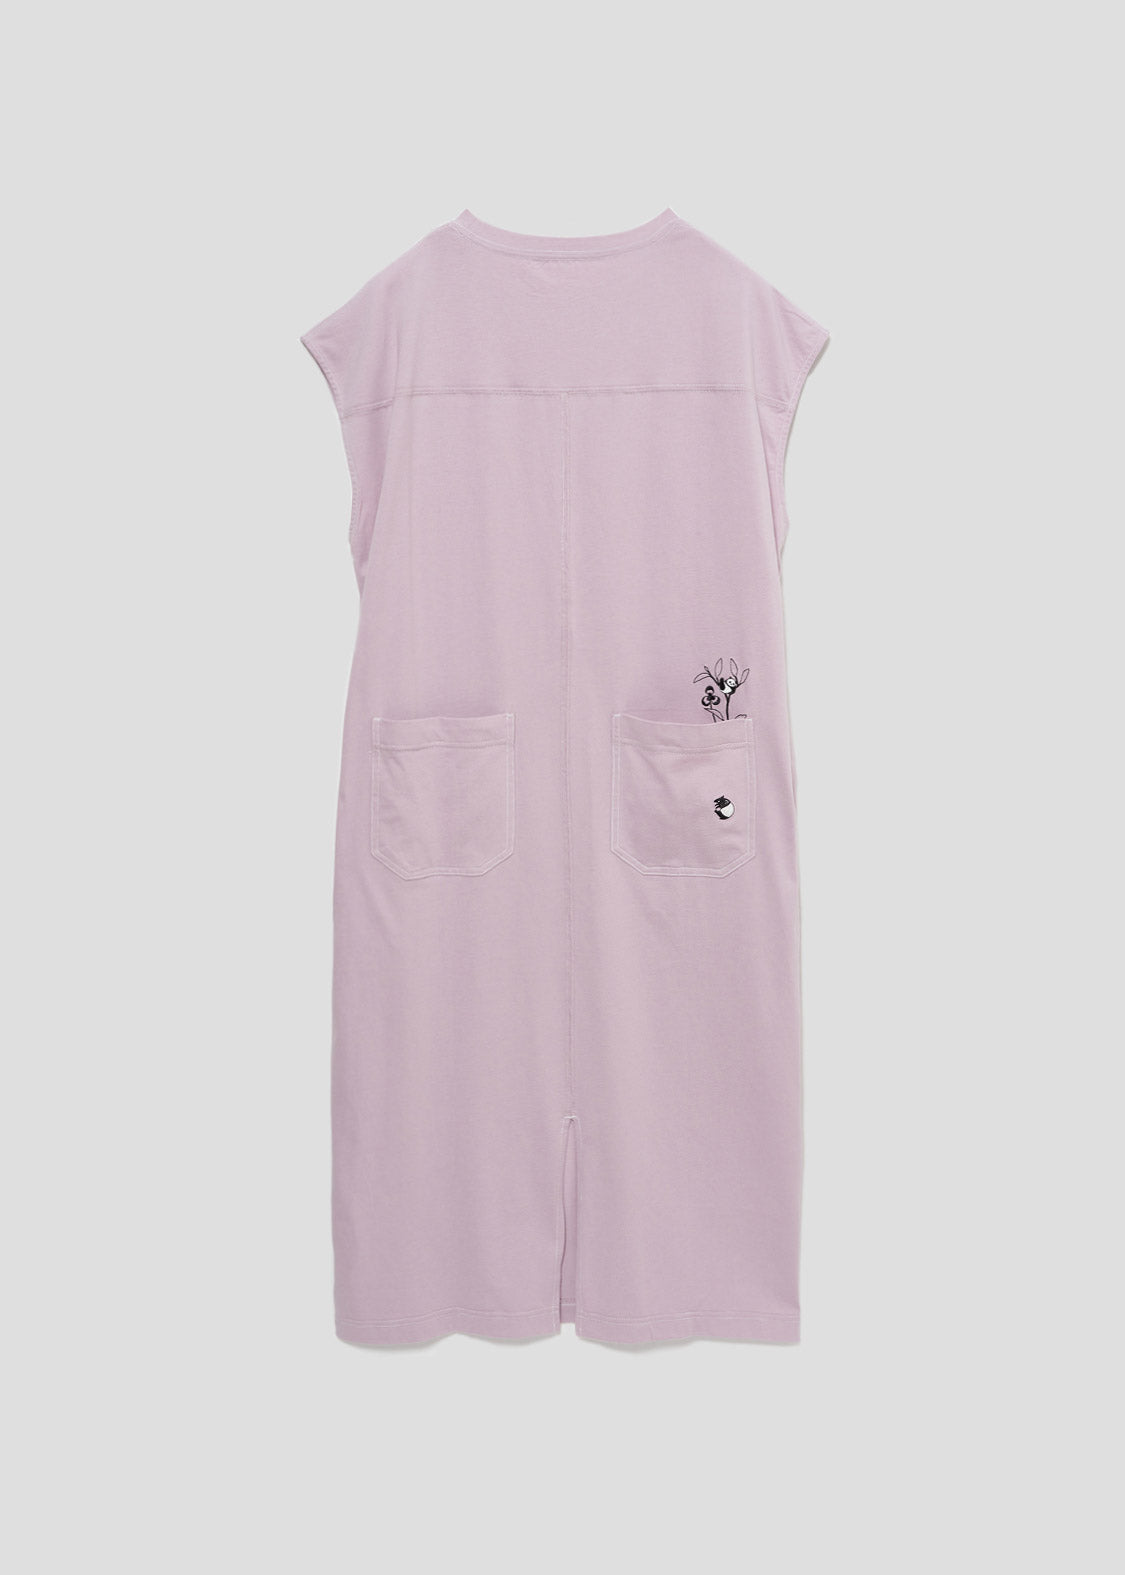 Short Sleeve One-Piece (Rolling Pandas with Plants)